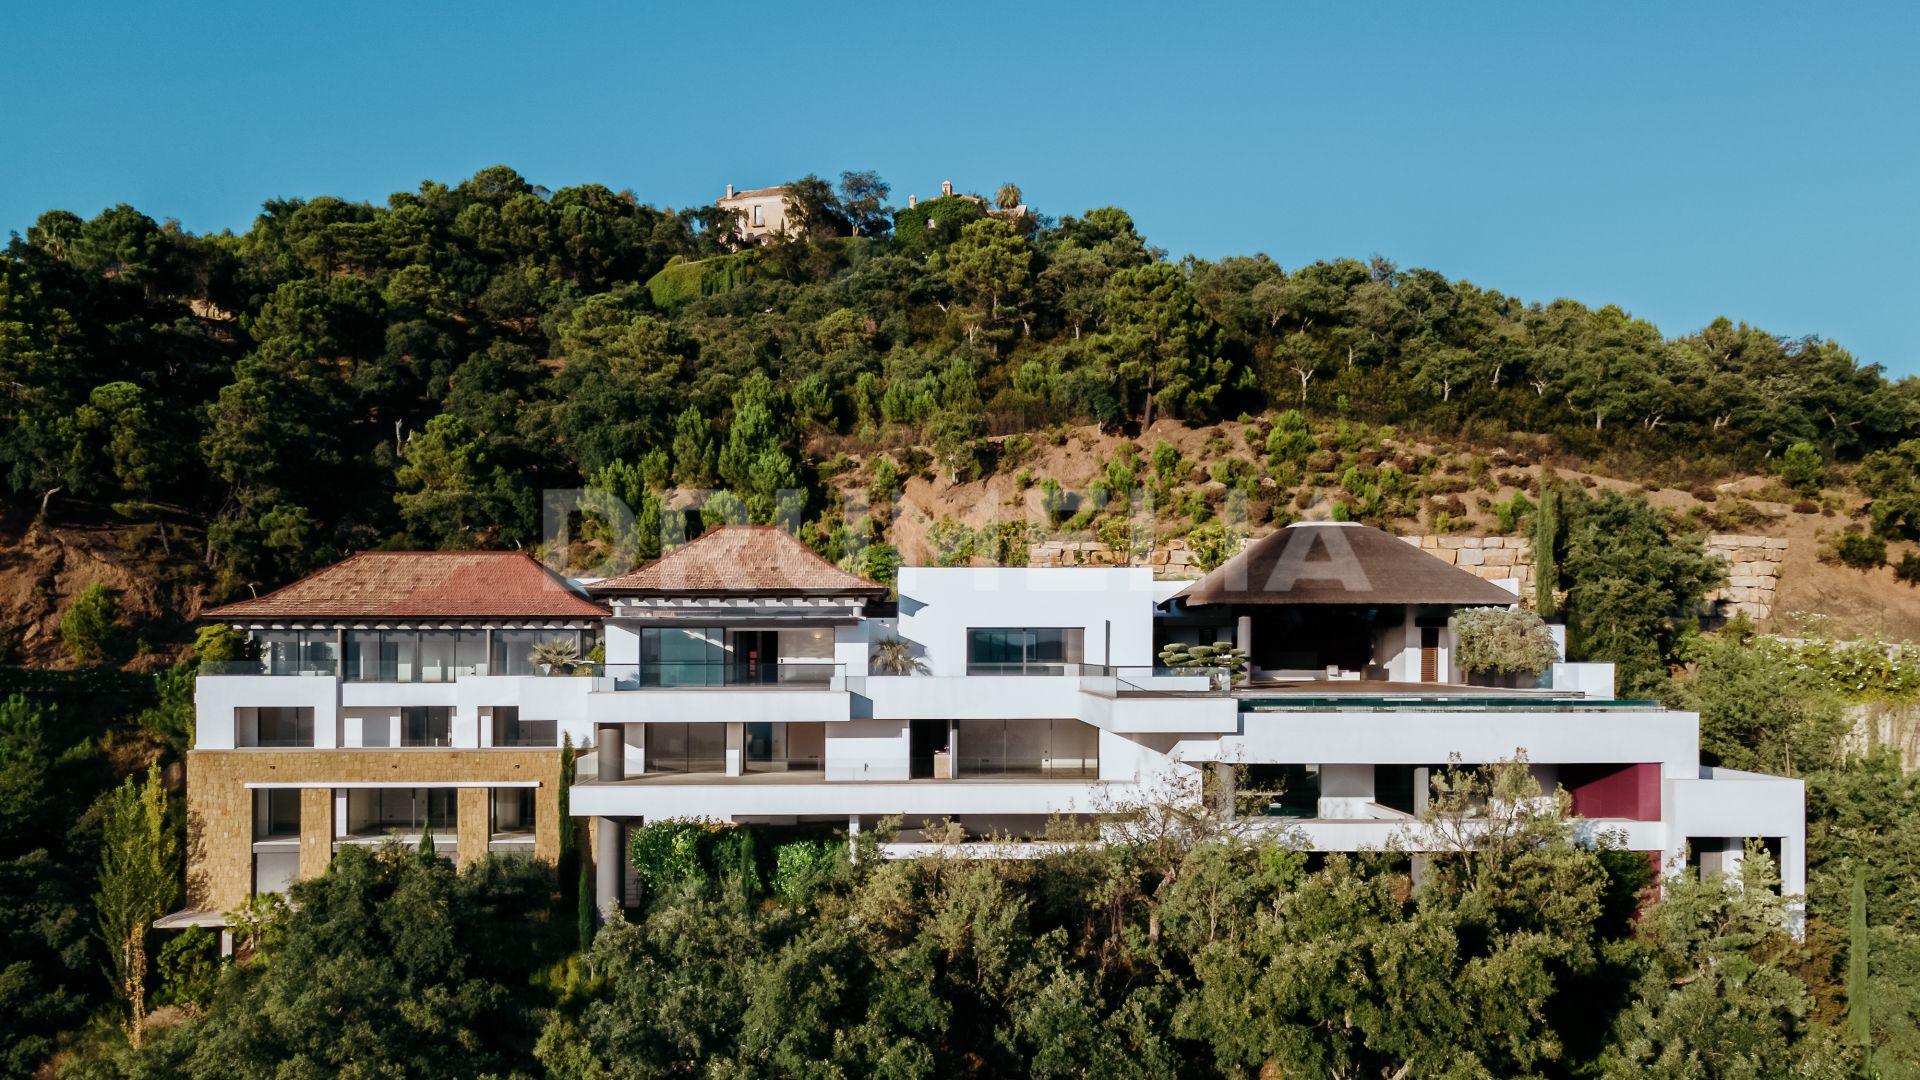 New State-of-the-Art Unique Mansion with Incredible Views in Zagaleta, Benahavis